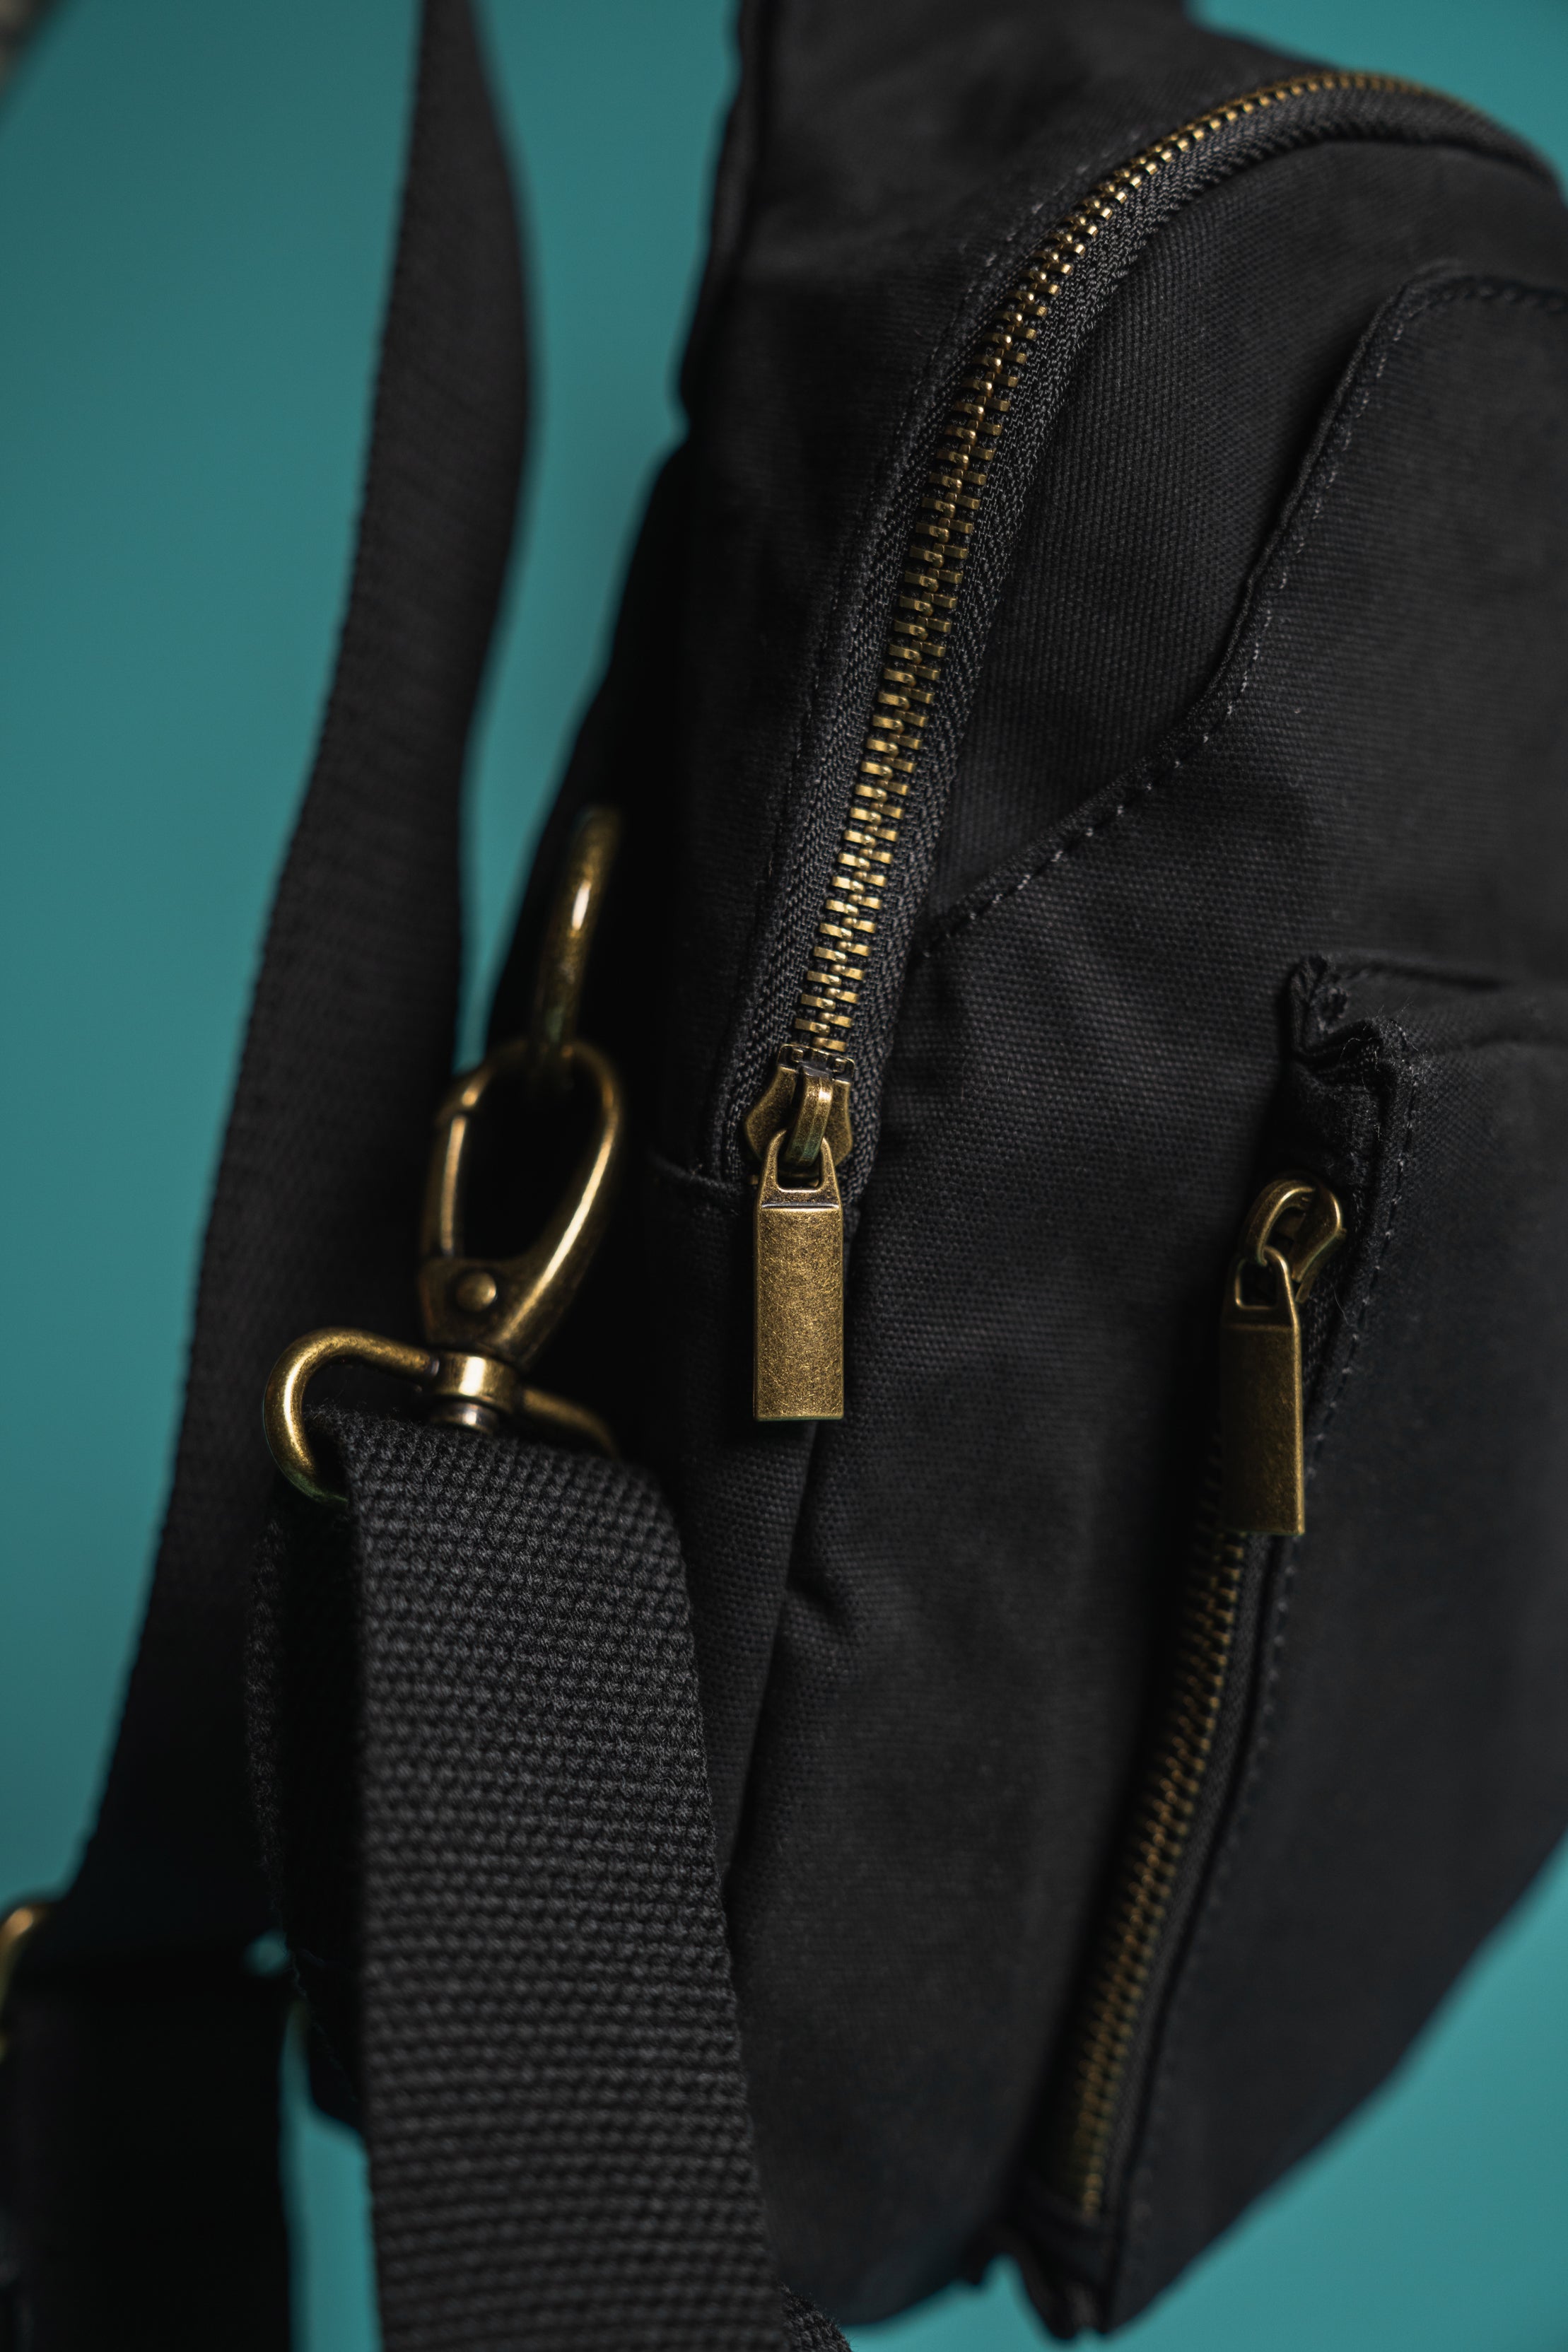 The Scout Sling Bag